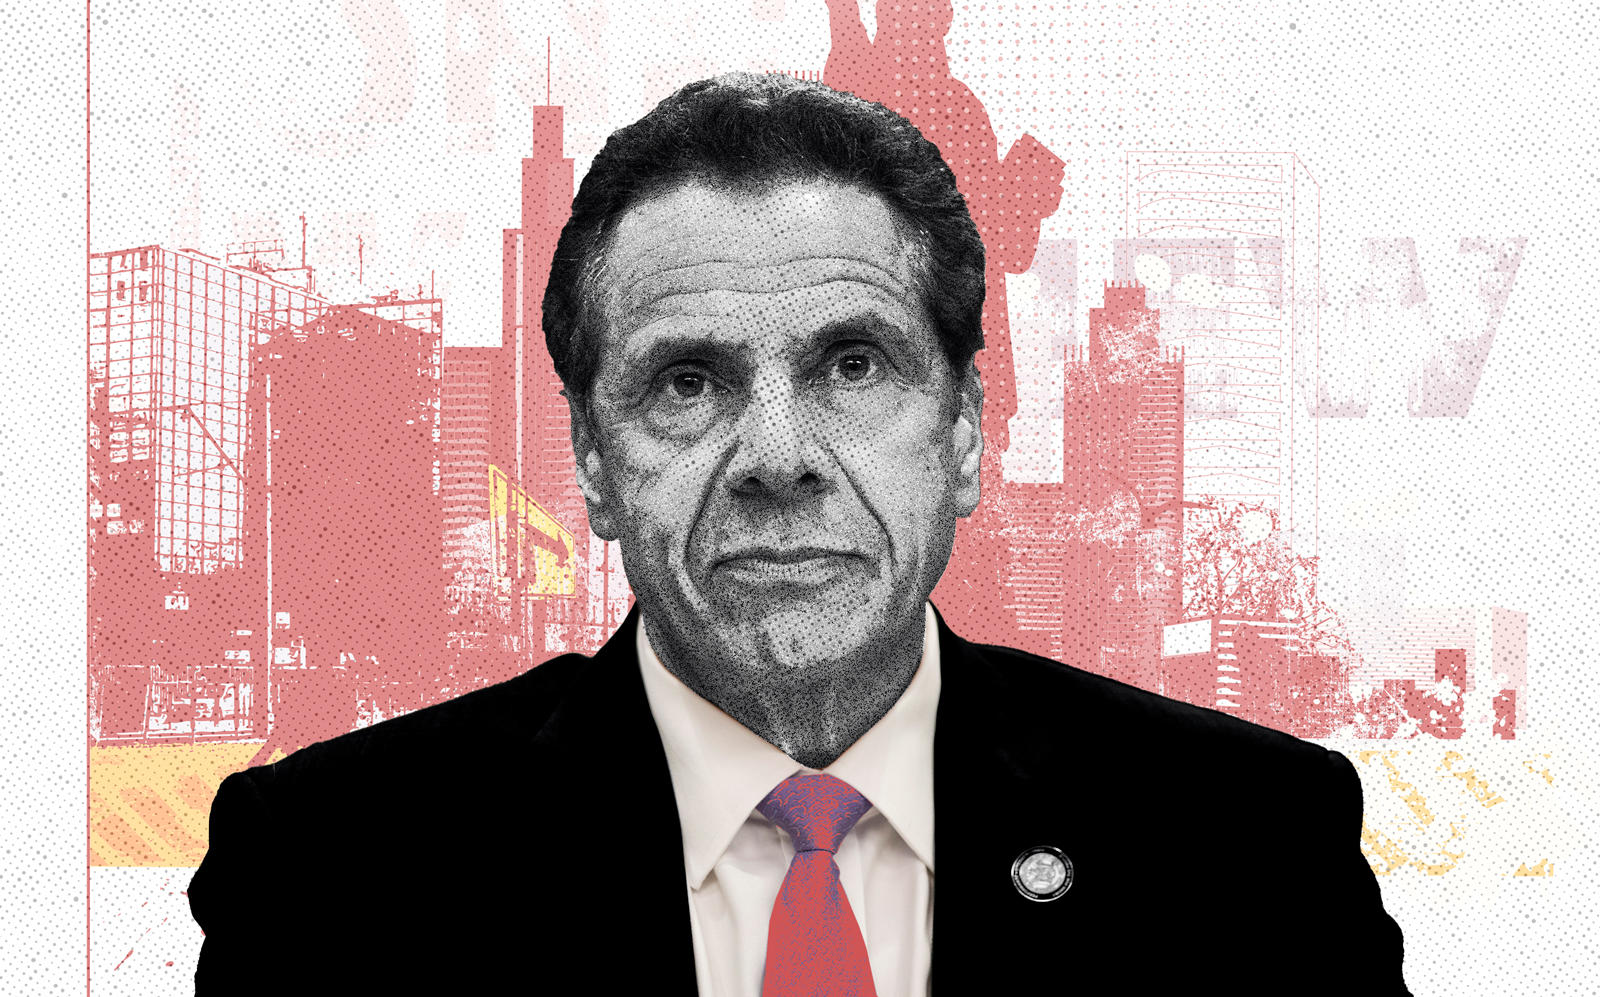 Photo Illustration of Gov. Andrew Cuomo (iStock, Getty/Illustration by Kevin Rebong for The Real Deal)